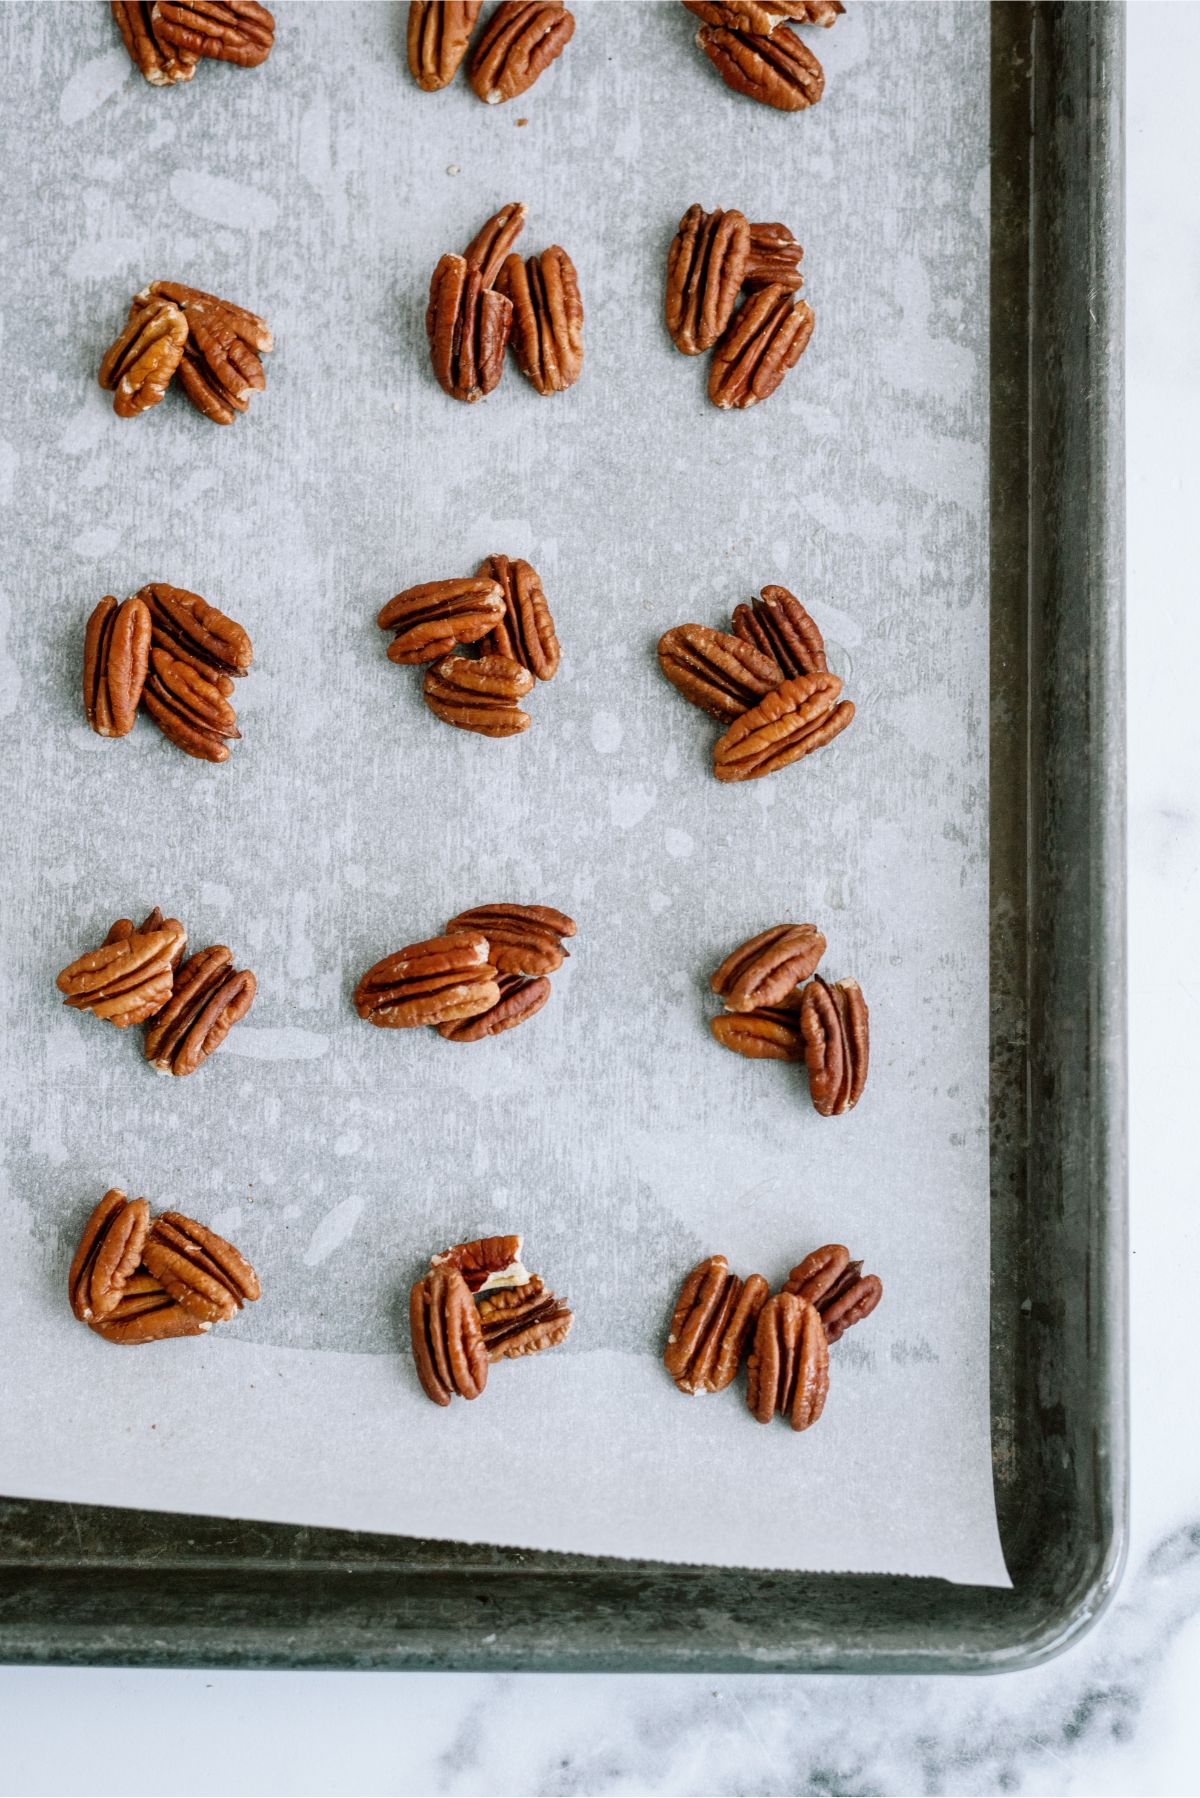 Pecans grouped in 3s on baking sheet